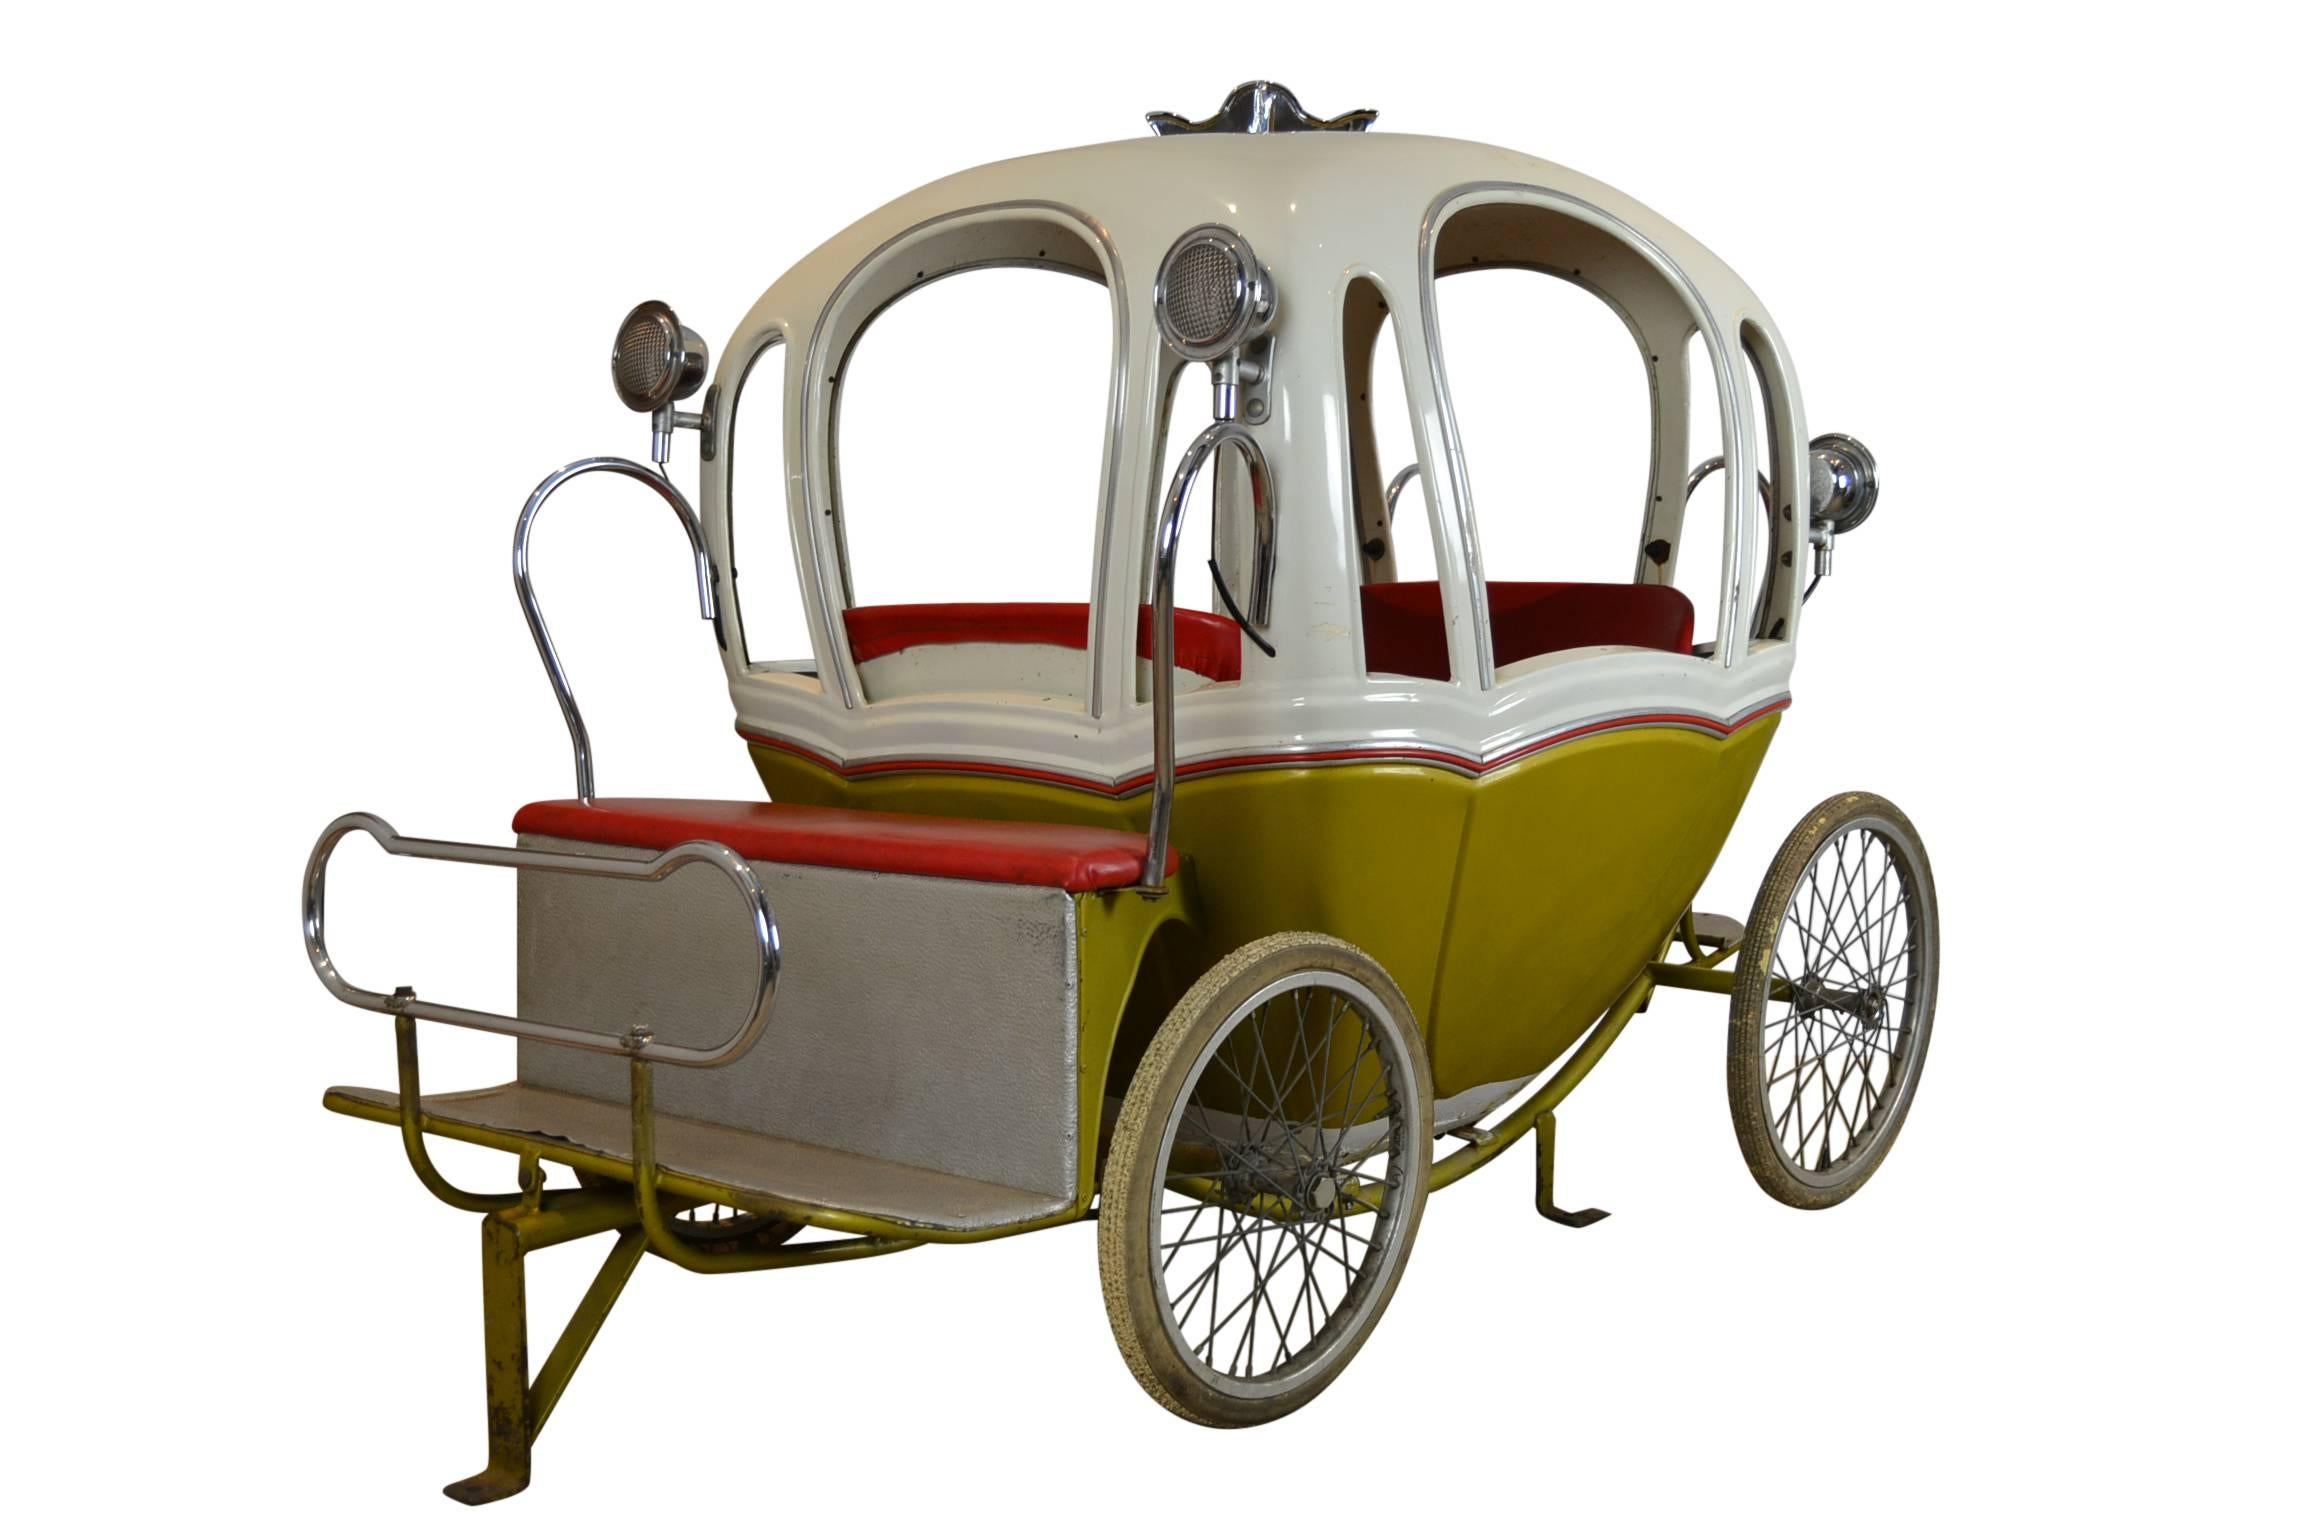 Exceptional Fairground, Carousel , Merry-go-round Object. 
A 1960s handmade metal and chrome Pumpkin Carriage - Cinderella Carriage - closed Fairy-tale Carriage 
designed and made by L' Autopede Belgium. 
Delivered with two matching fiberglass